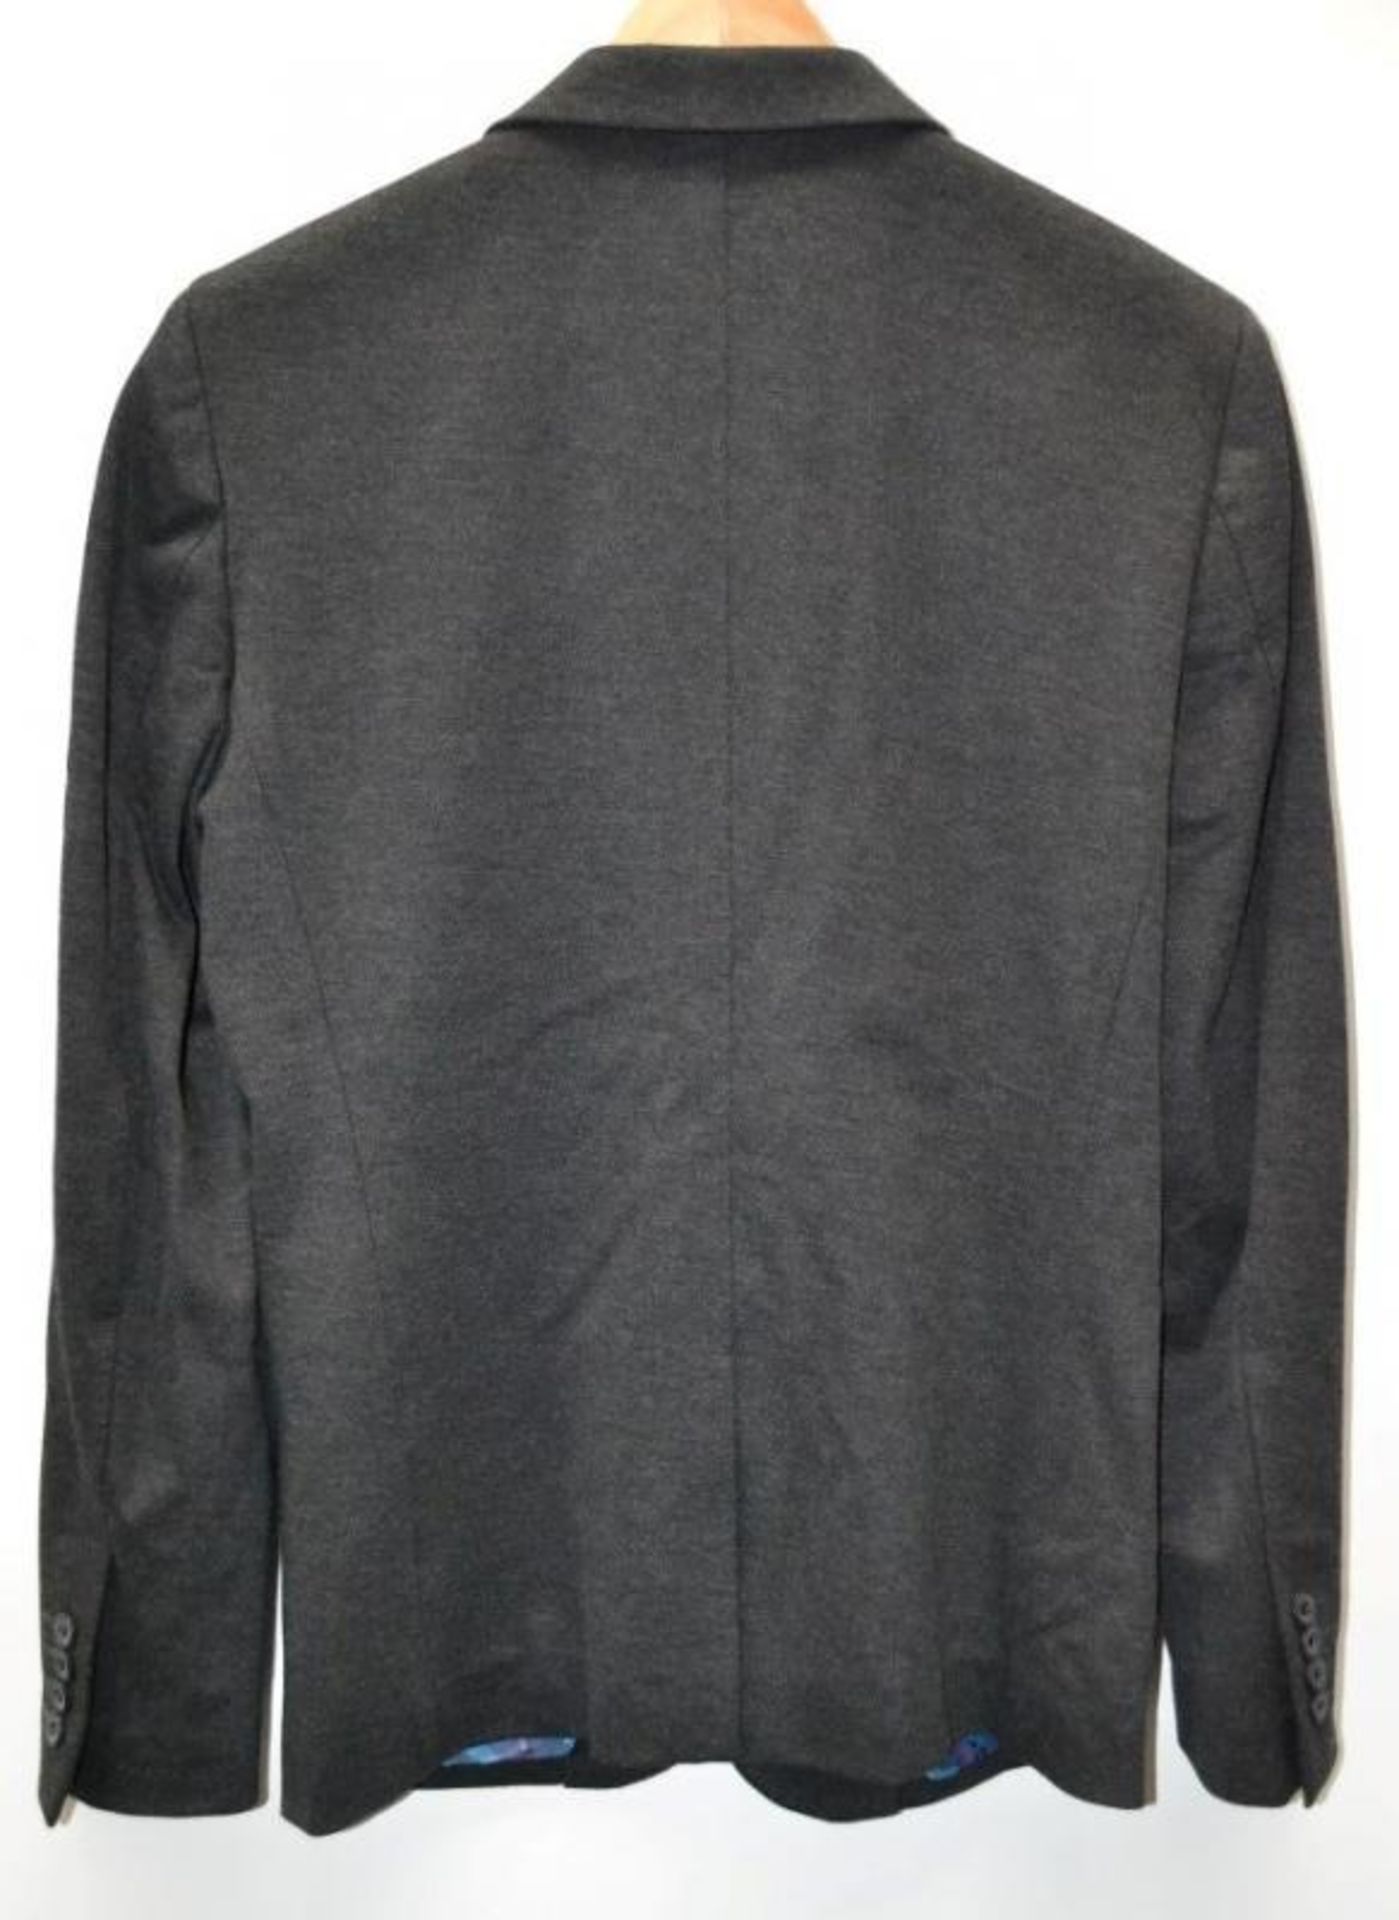 1 x PRE END Branded "Dom" Mens Blazer Jacket - New Stock With Tags - Recent Store Closure - Colour: - Image 3 of 3